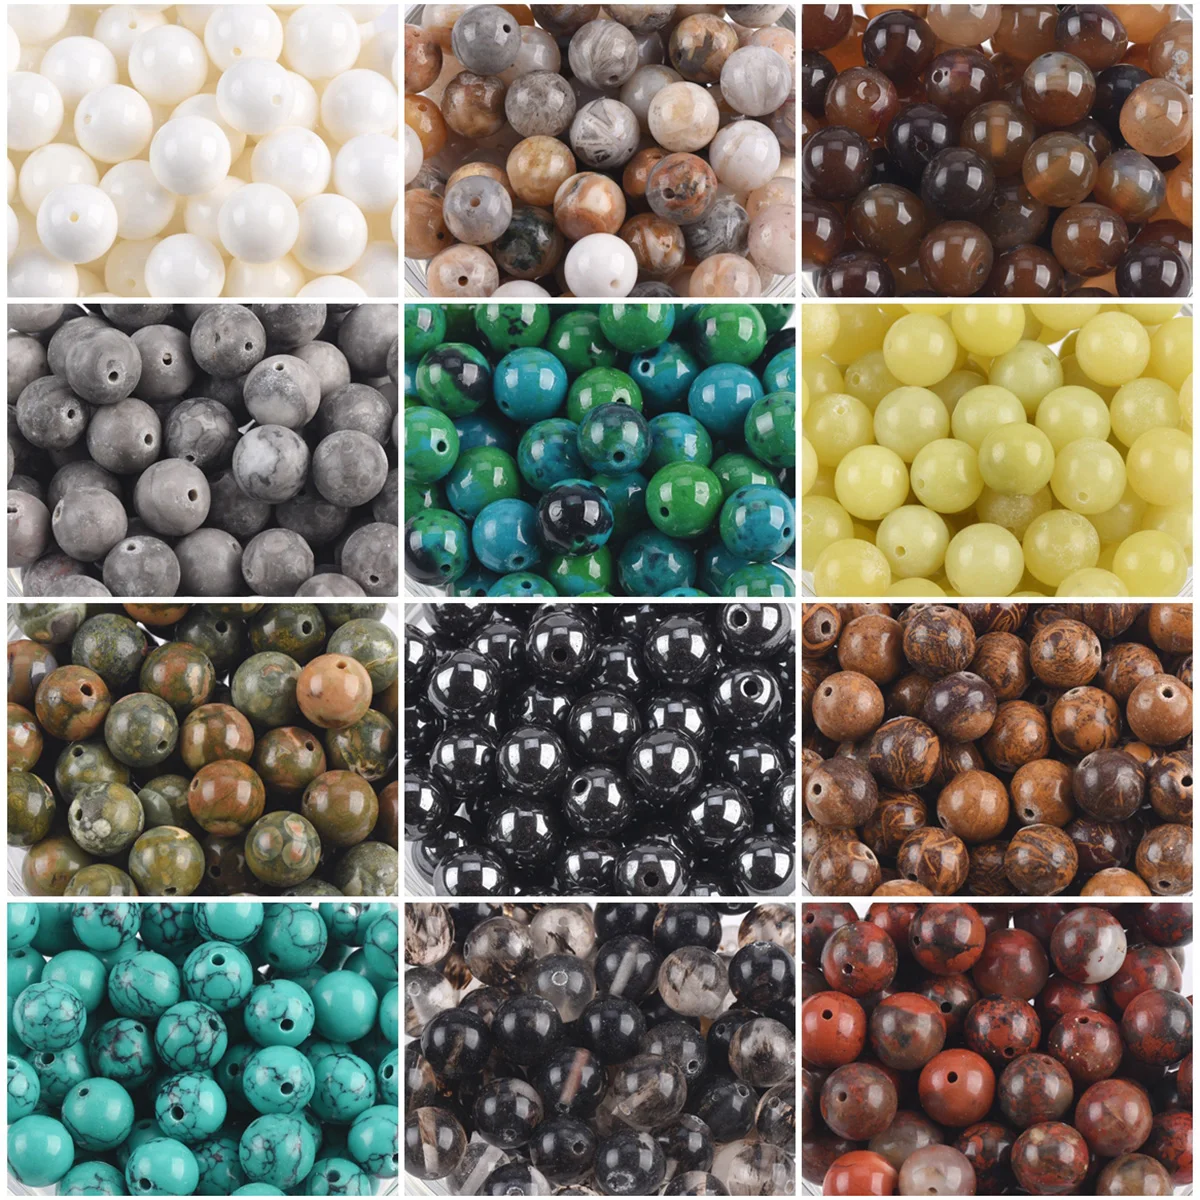 Round 4mm 6mm 8mm 10mm 12mm Natural Stone Rocks Loose Spacer Beads lot for DIY Bracelet Jewelry Making Crafts Findings 1 strand 35cm natural stone rock jasper round 4mm 6mm 8mm 10mm 12mm beads for jewelry making diy bracelet findings